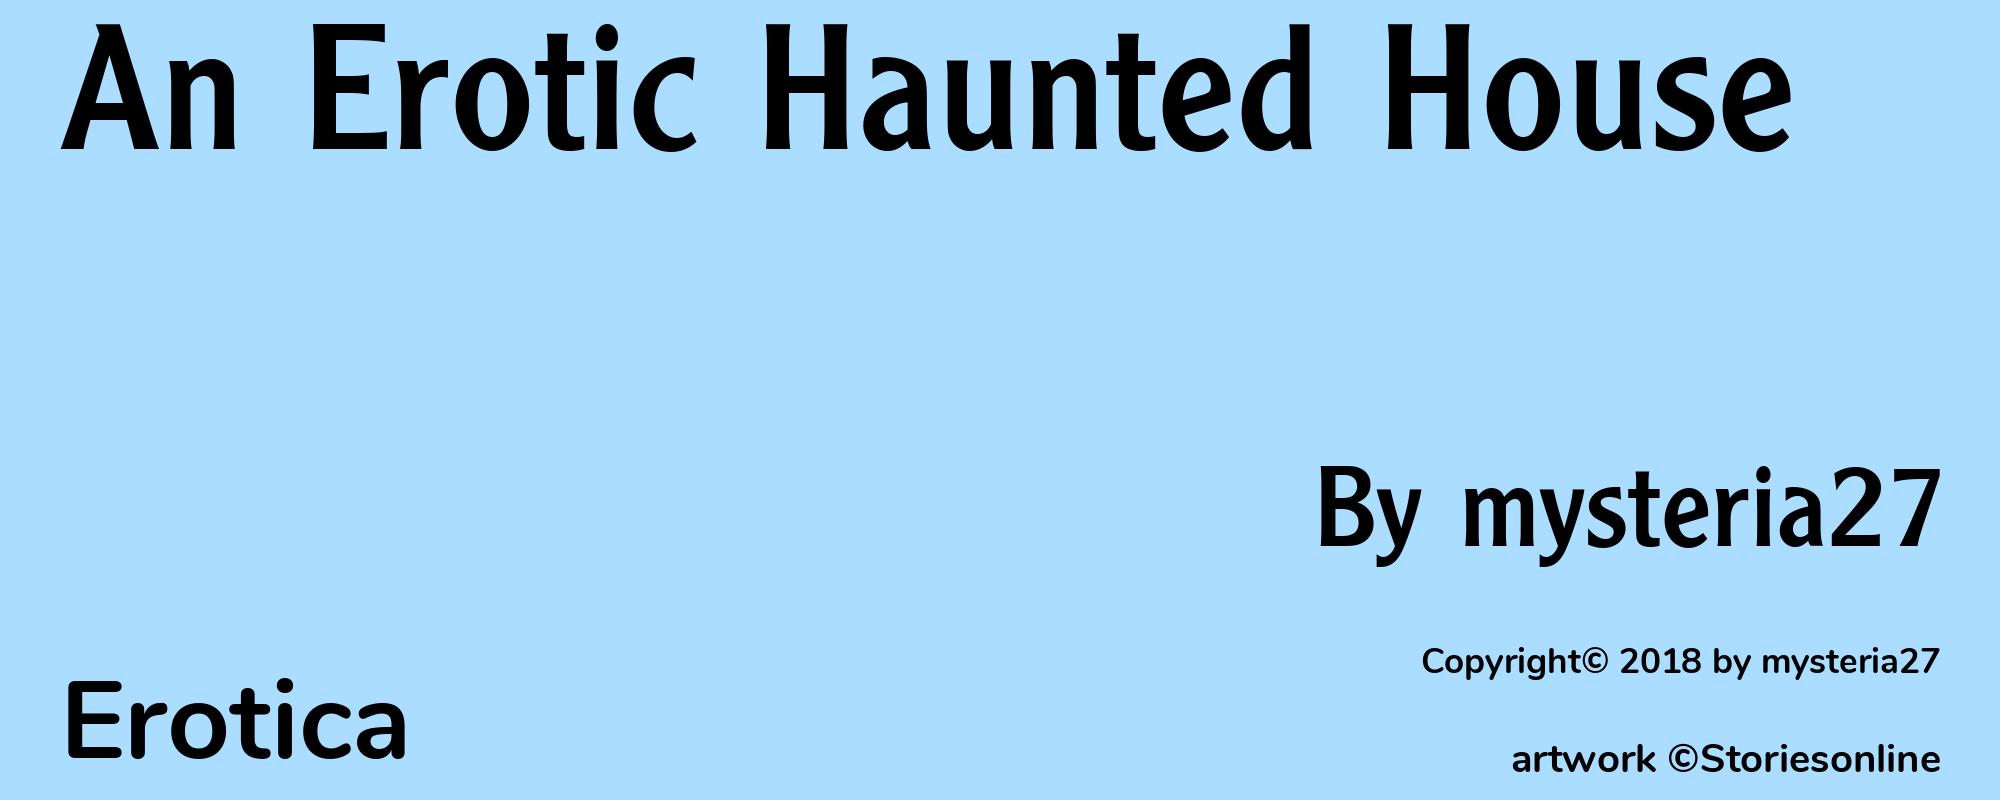 An Erotic Haunted House - Cover